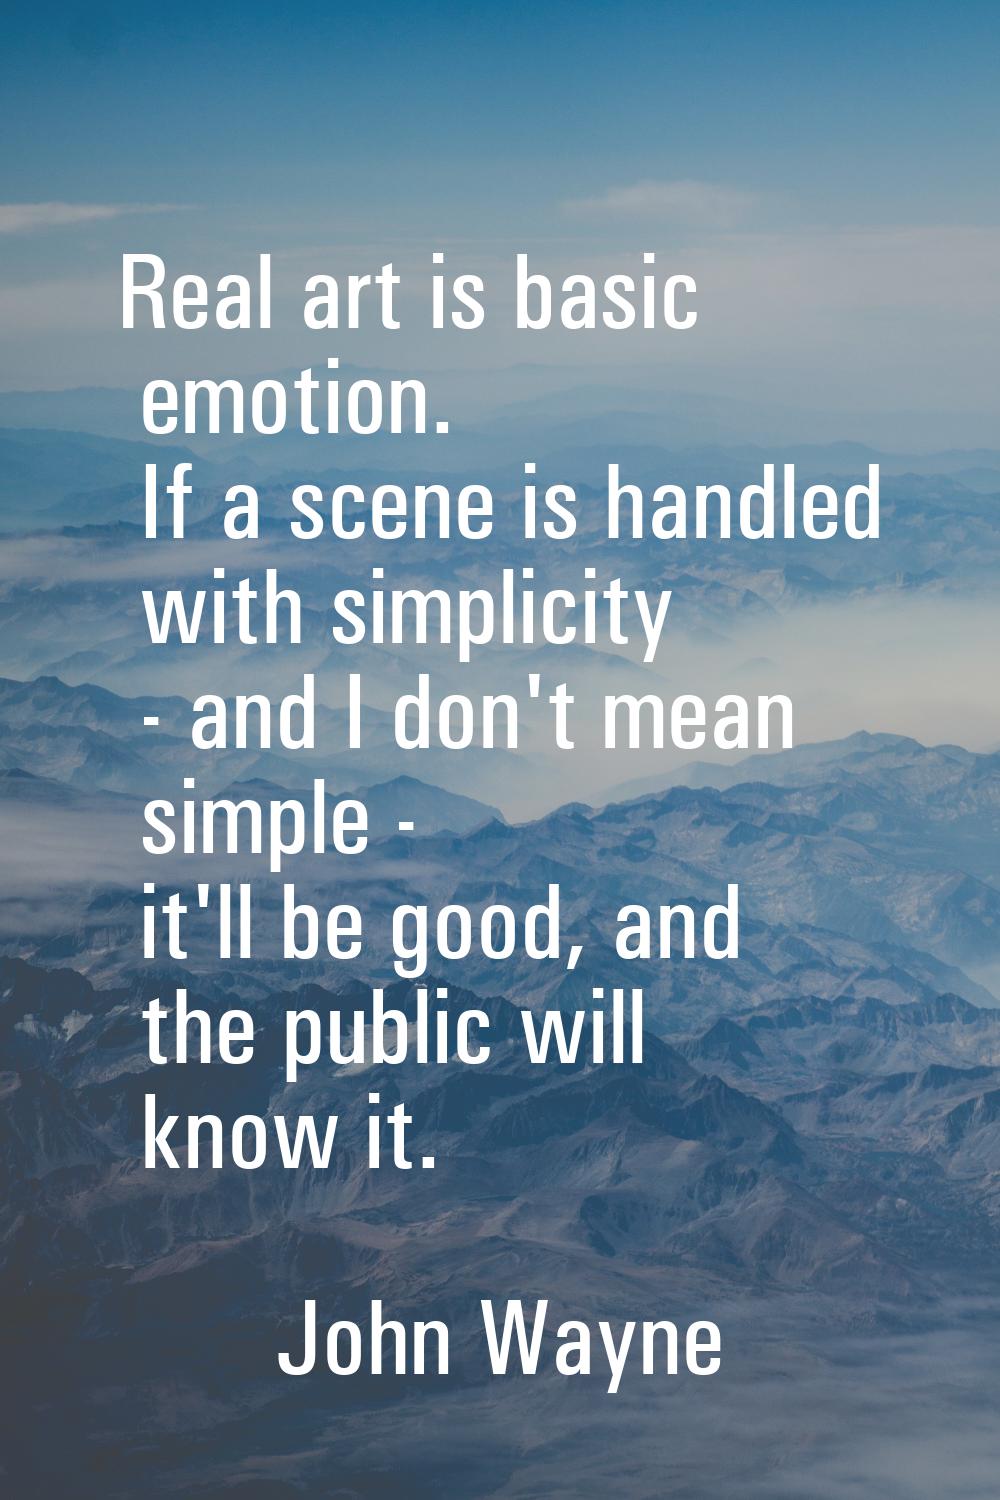 Real art is basic emotion. If a scene is handled with simplicity - and I don't mean simple - it'll 